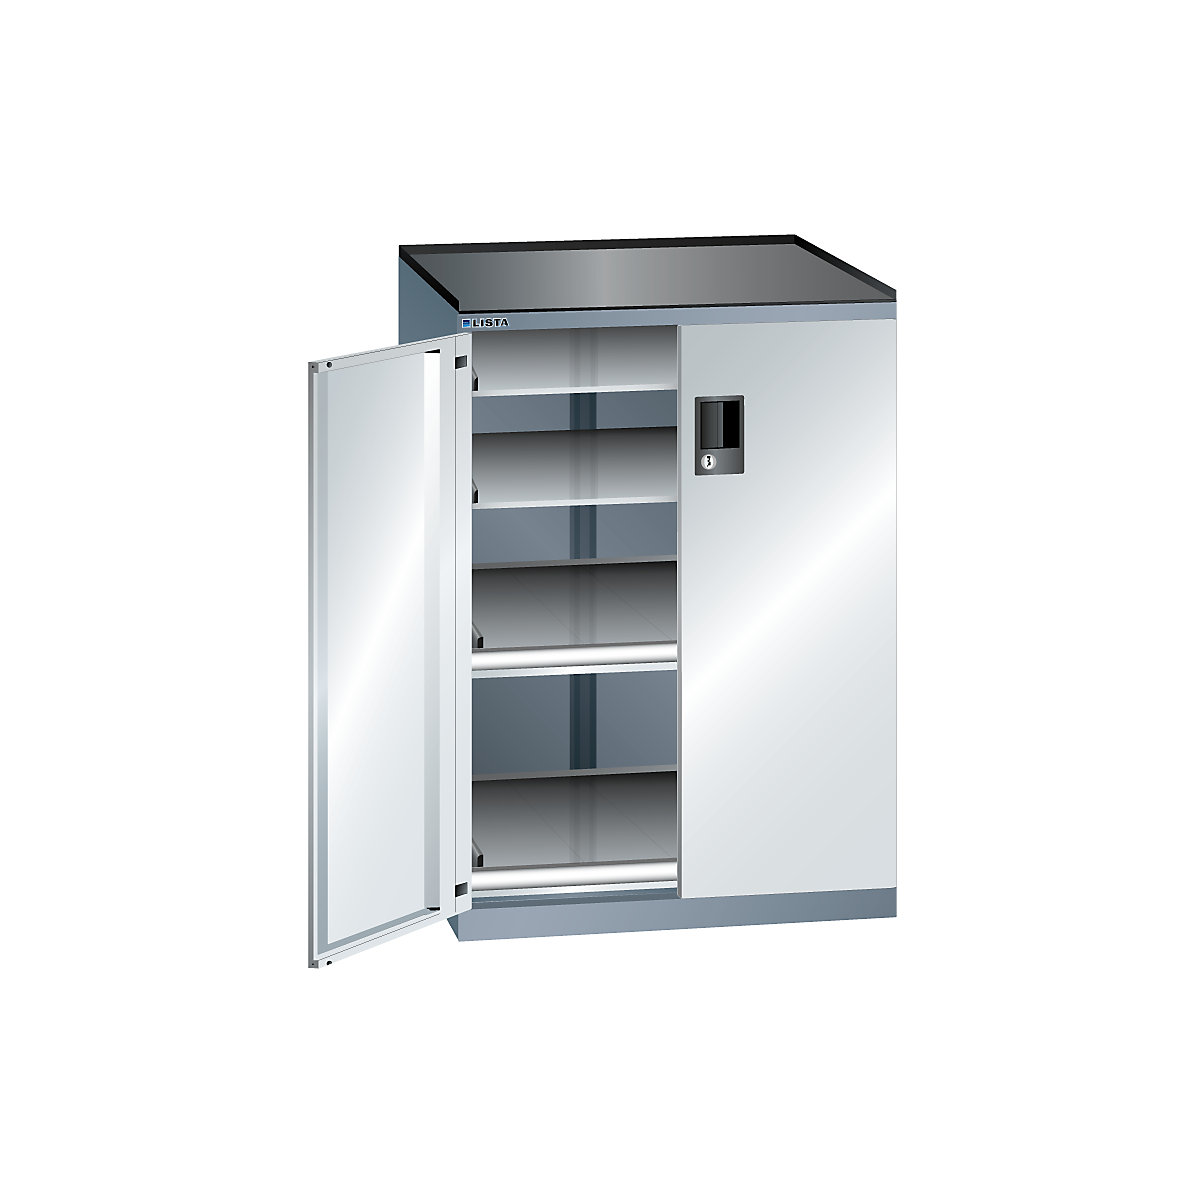 Drawer cupboard with hinged doors – LISTA, height 1020 mm, 4 shelves, max. load 75 kg, grey metallic / light grey-3